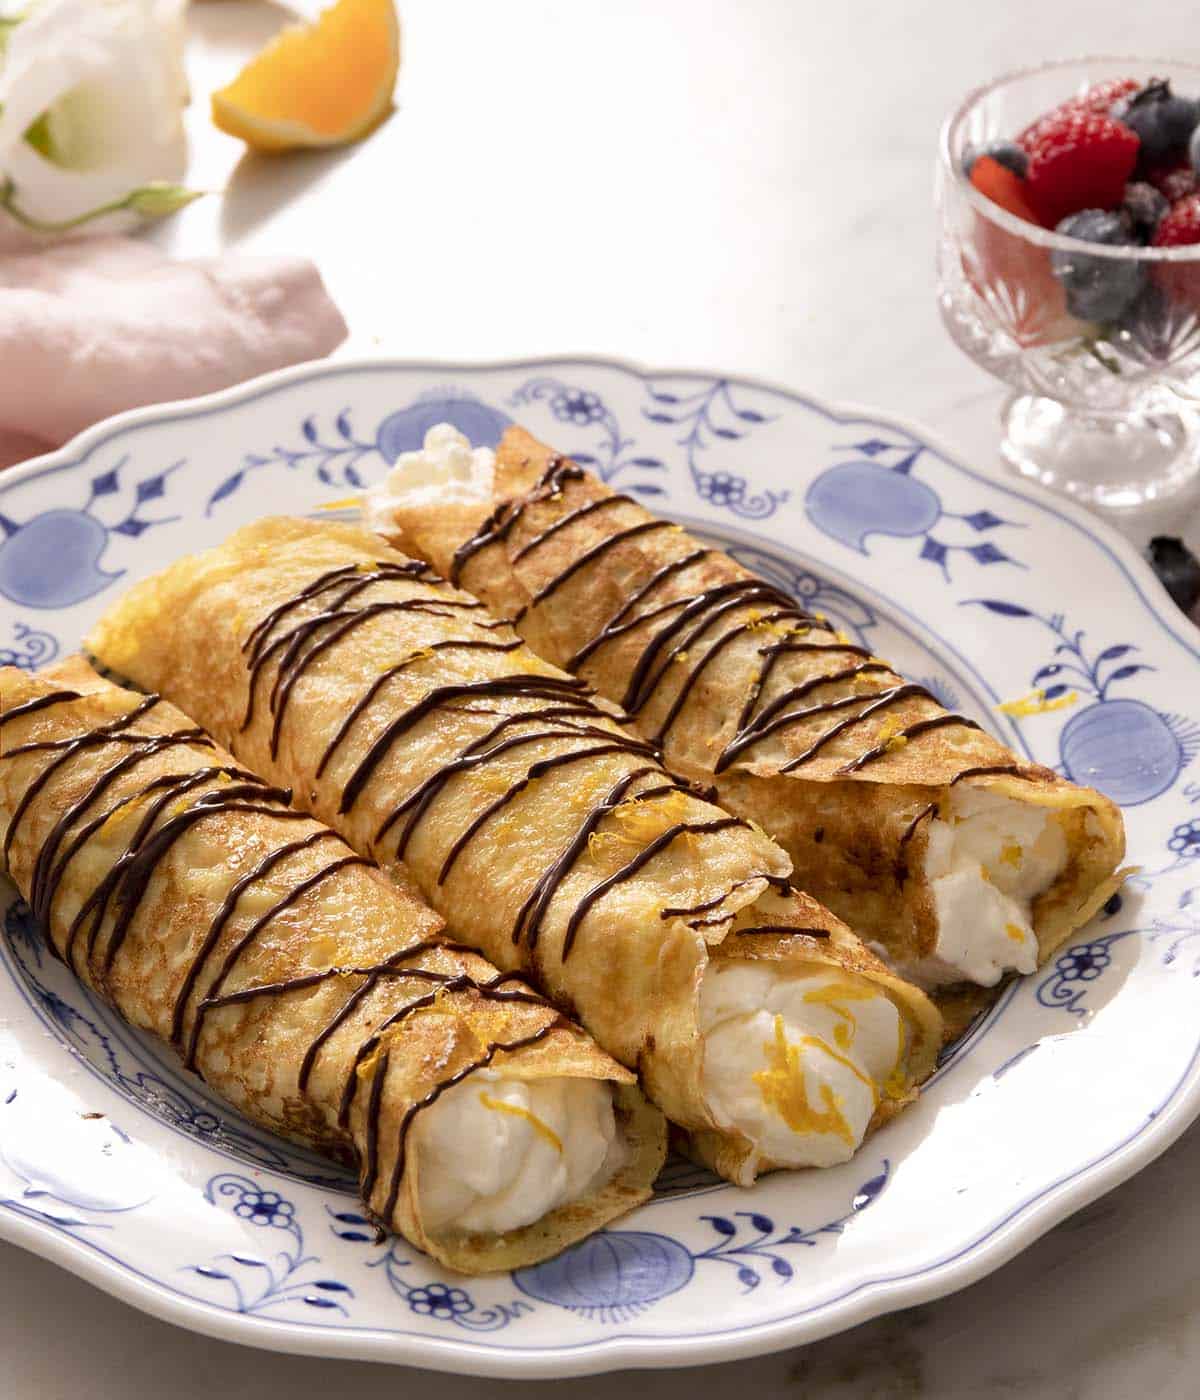 Crepes drizzled with chocolate and filled with whipped cream.